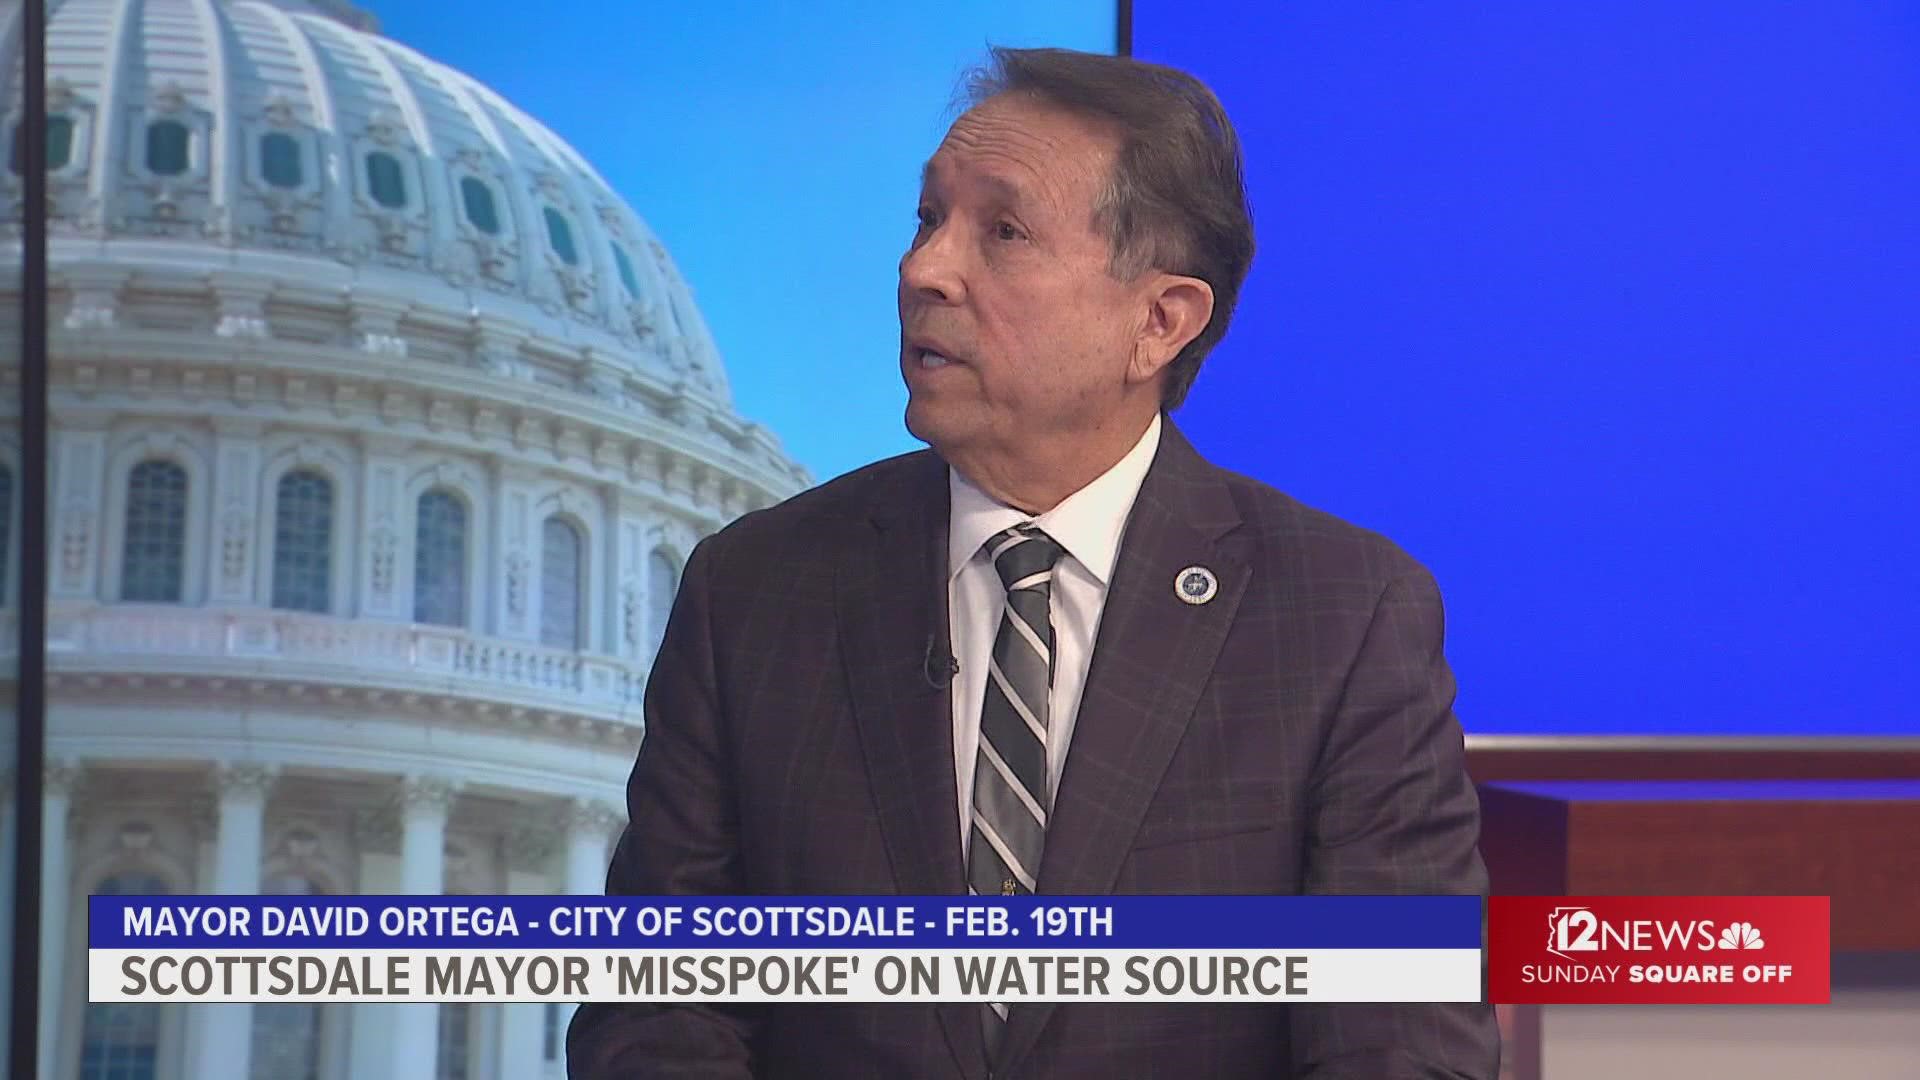 We correct the record regarding what Scottsdale Mayor David Ortega said during and after his Feb. 19 appearance on "Sunday Square Off."